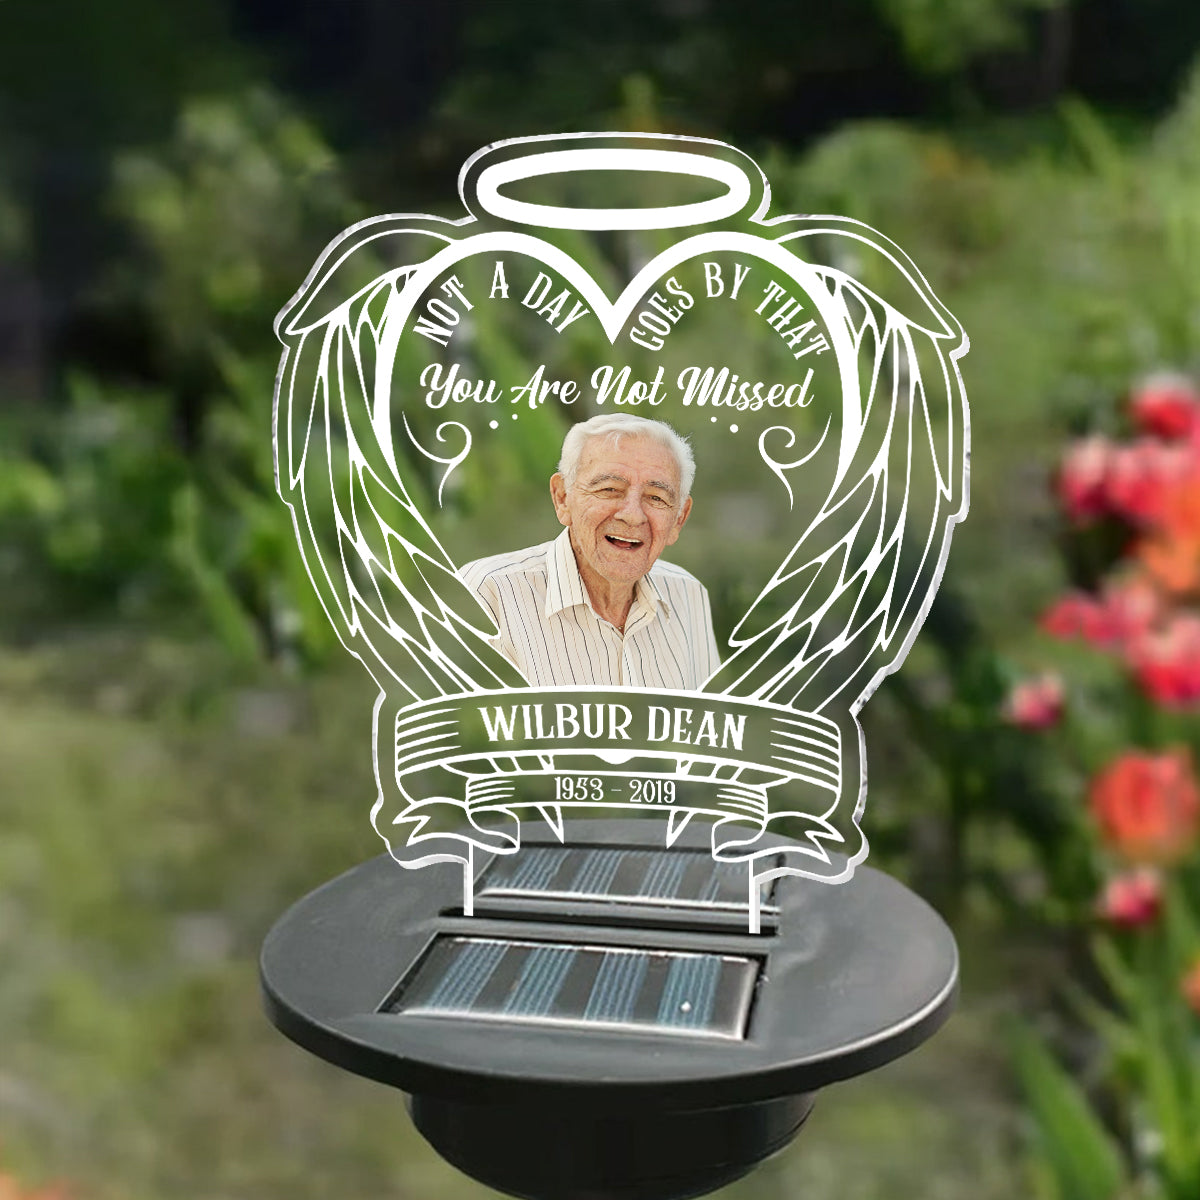 Not A Day Goes By That You Are Not Missed - Memorial gift for loss of  - Personalized Garden Solar Light